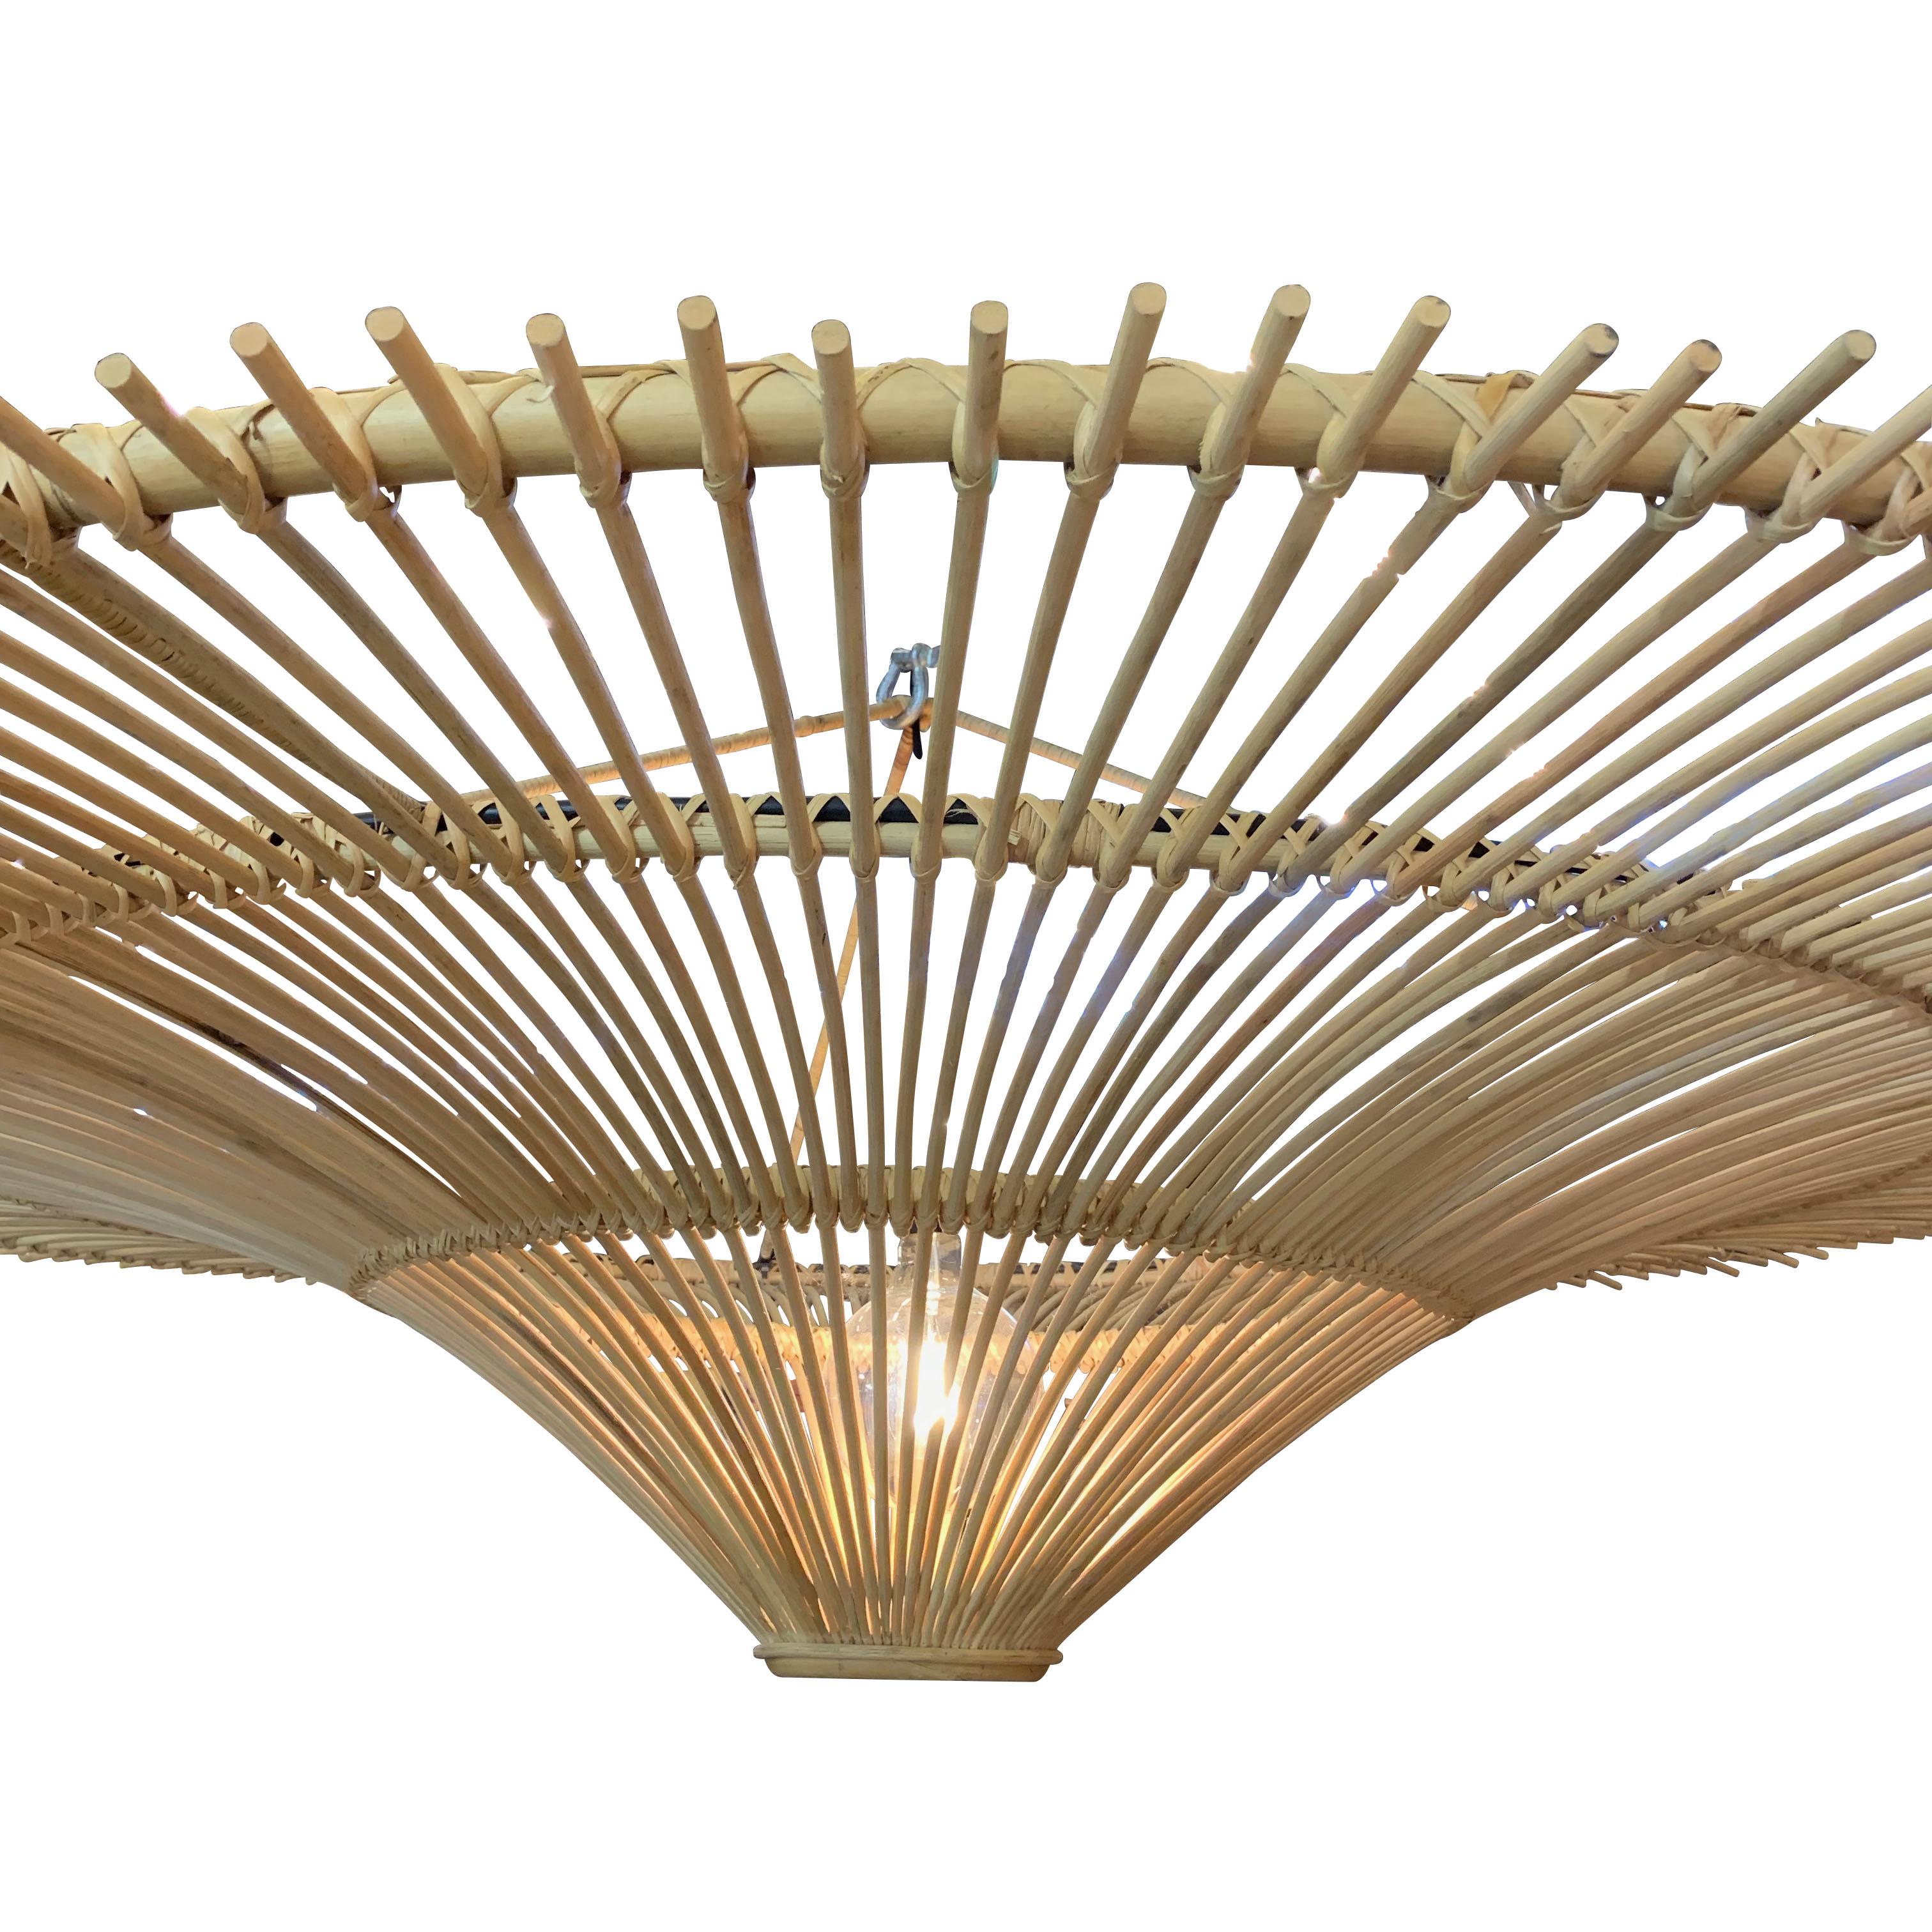 Contemporary Indonesian extra large round umbrella shaped chandelier made of bamboo
Single bulb
60 watt to 300 watt maximum
CURRENTLY IN STOCK
Also available in two additional sizes
L976 28